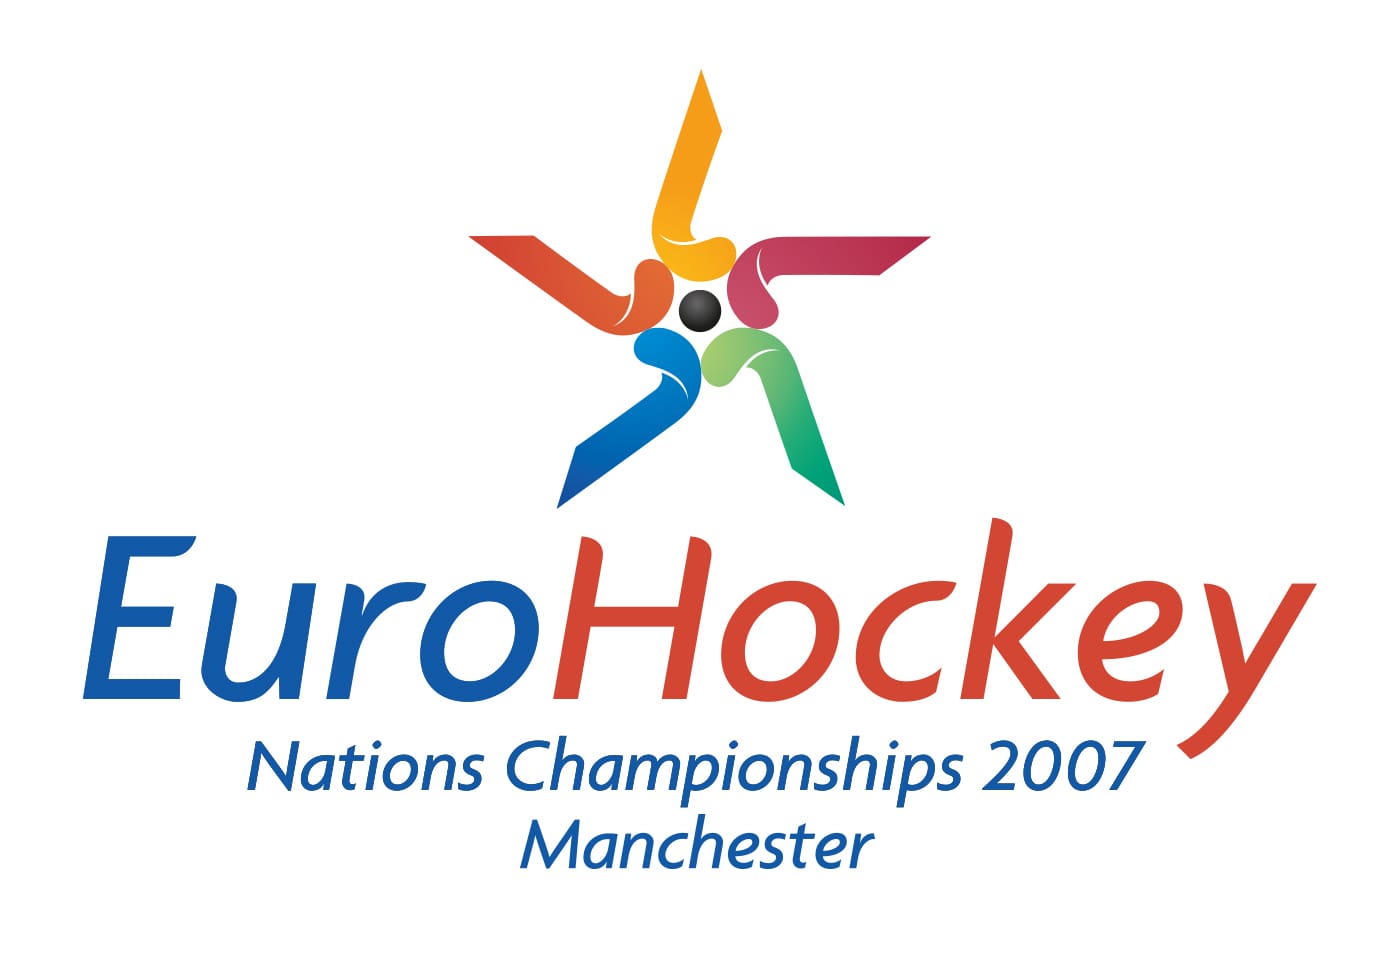 Event branding for an international hockey event hosted by England Hockey on behalf of the international federation.